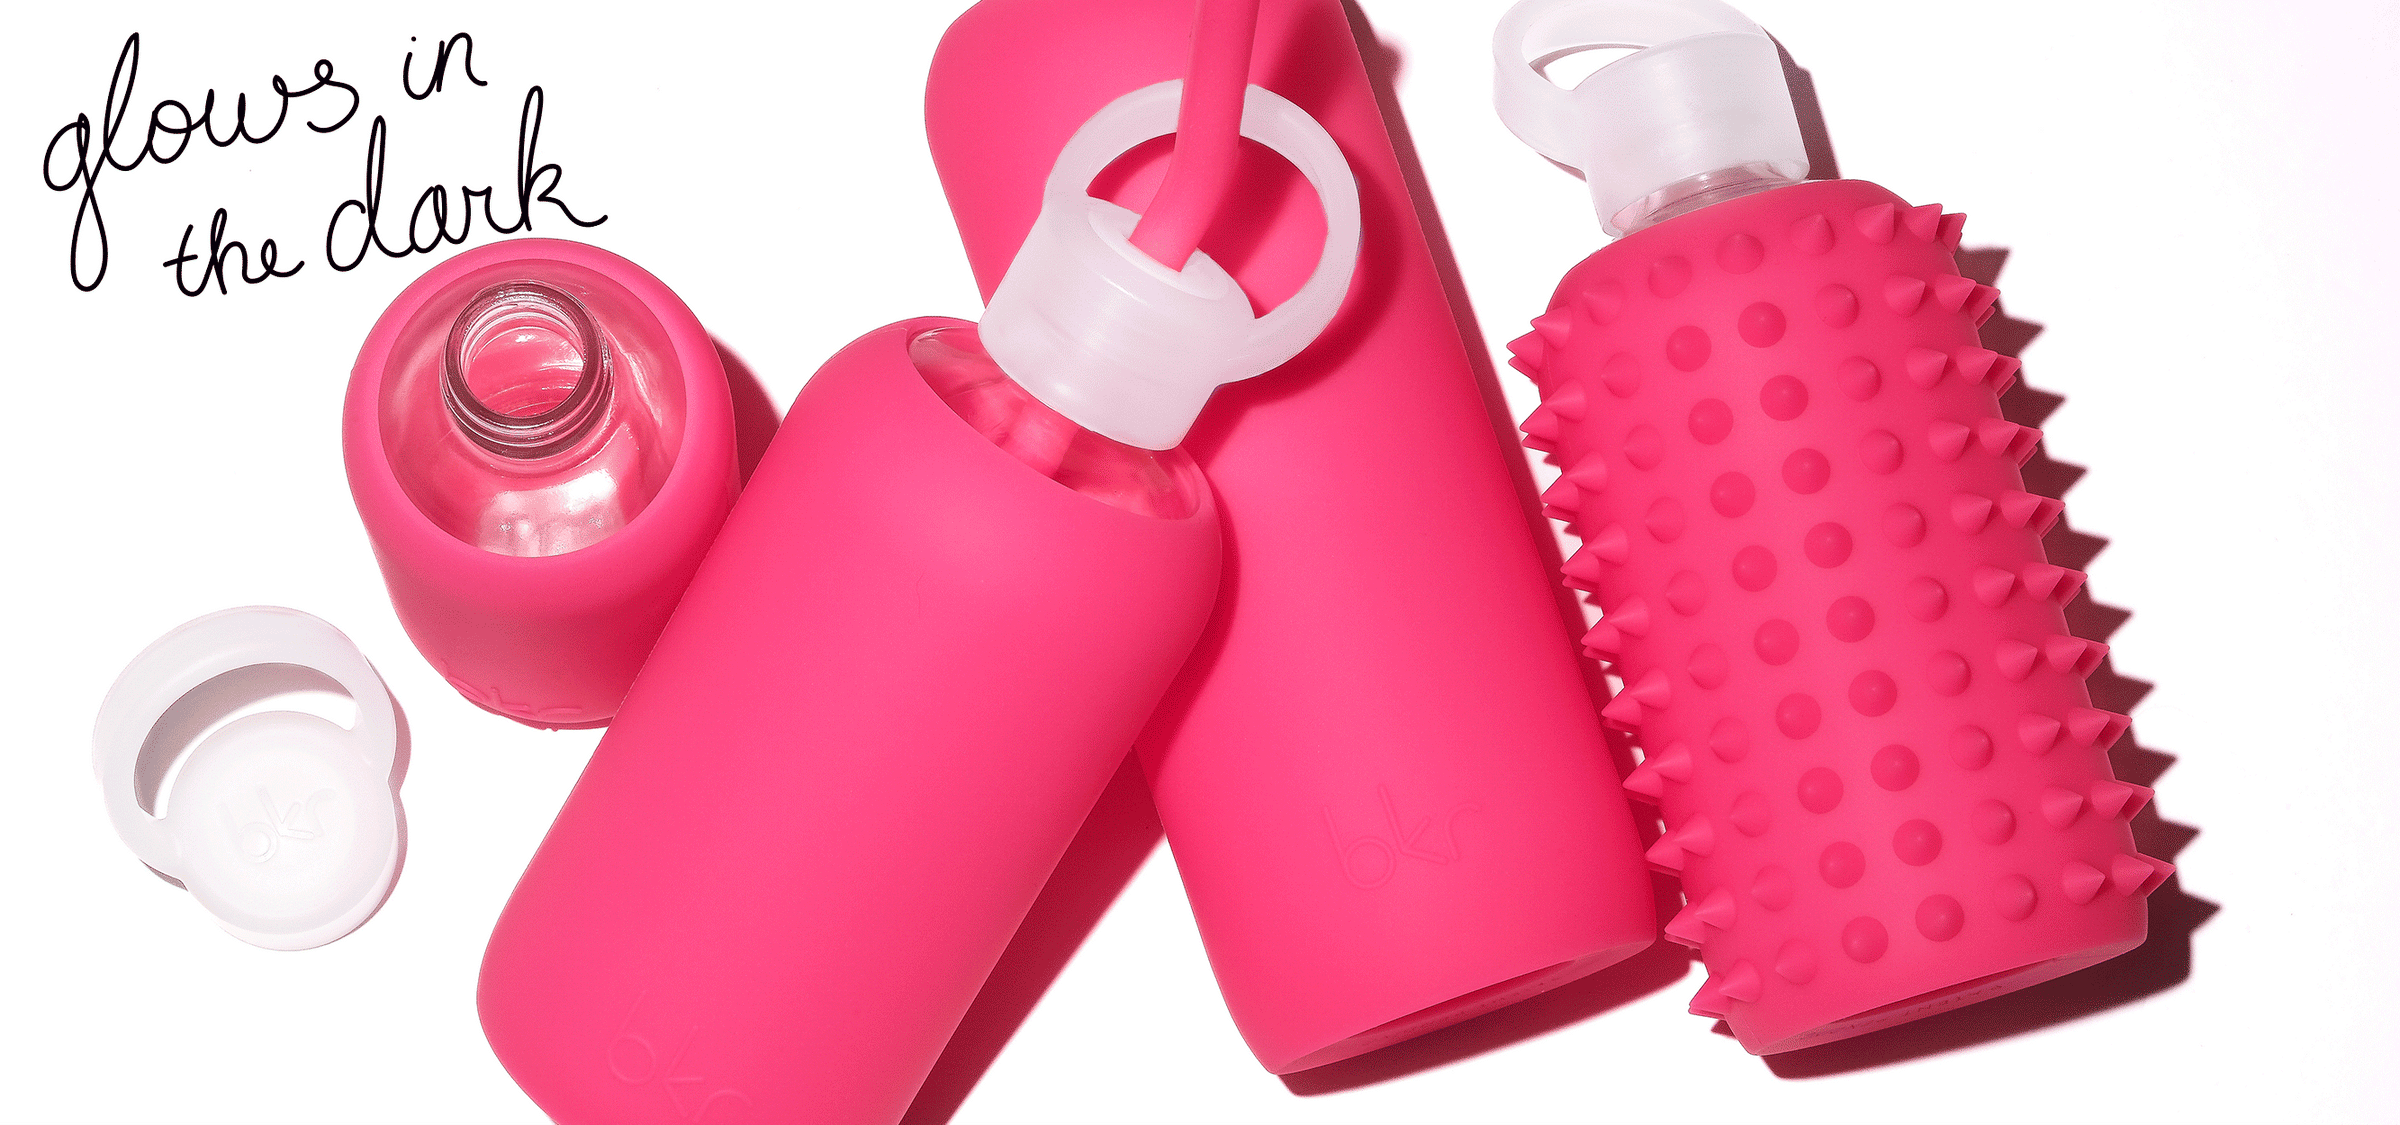 Hot Pink Glow in the Dark bkr glass water bottles with non-toxic lead free silicone sleeves